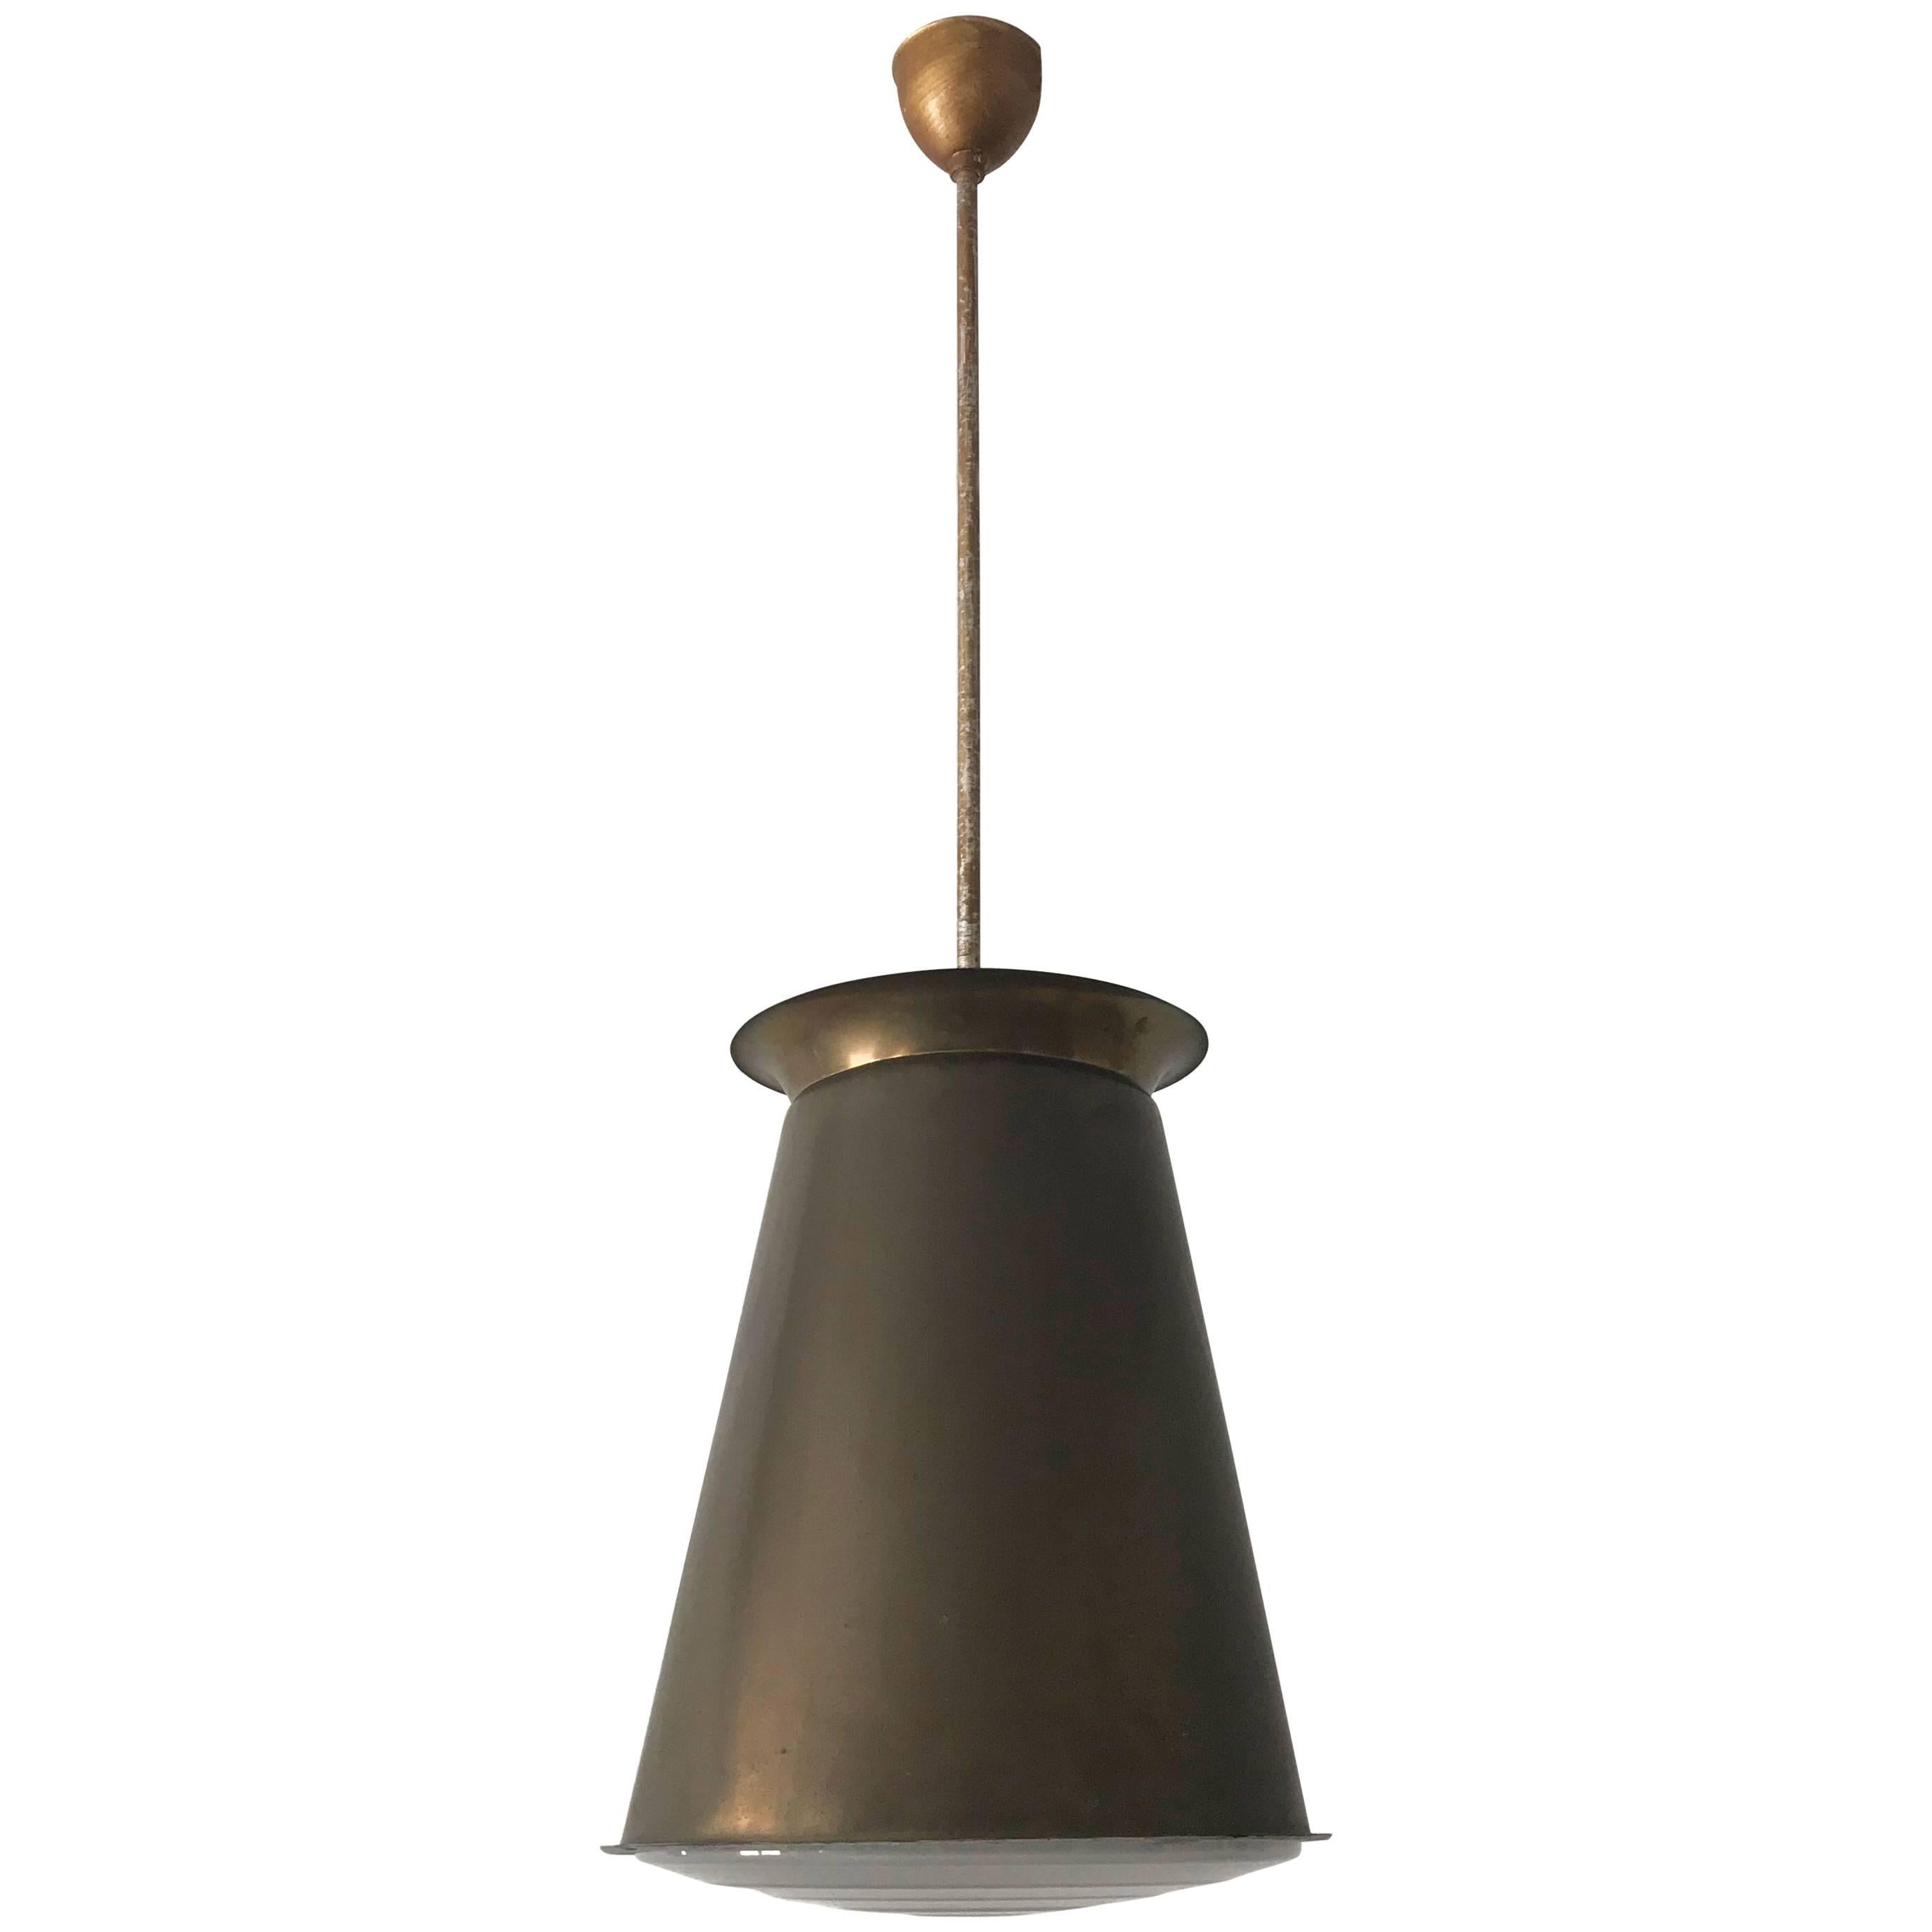 Exceptional Bauhaus Pendant Lamp by Adolf Meyer for Zeiss Ikon, 1930s, Germany For Sale